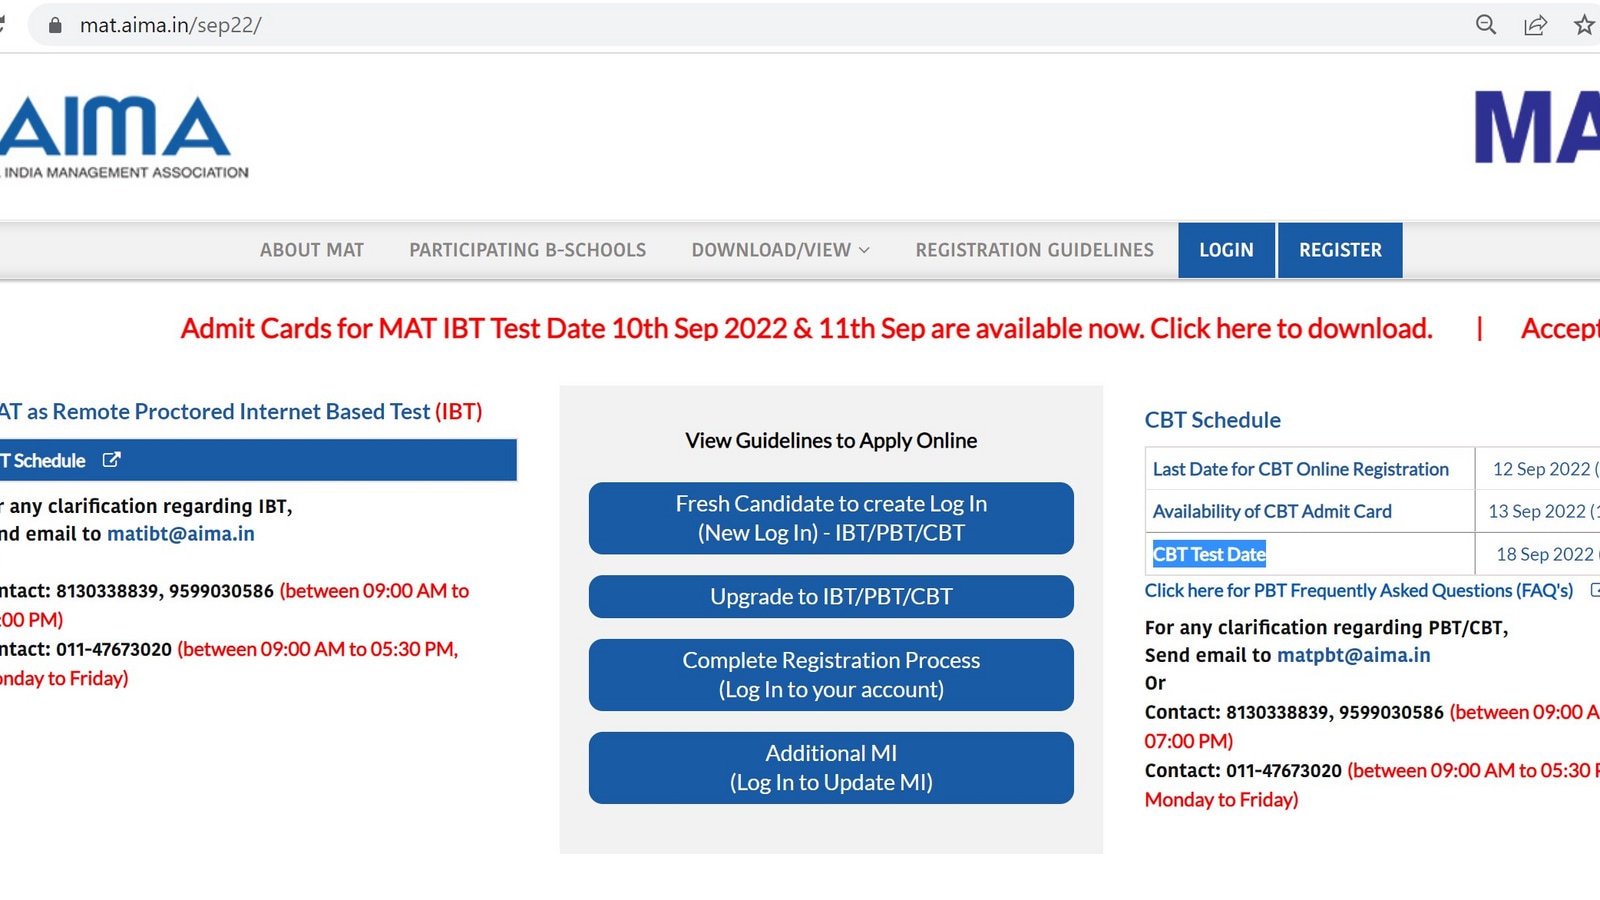 AIMA MAT 2022 CBT admit card releasing today at mat.aima.in, how to download